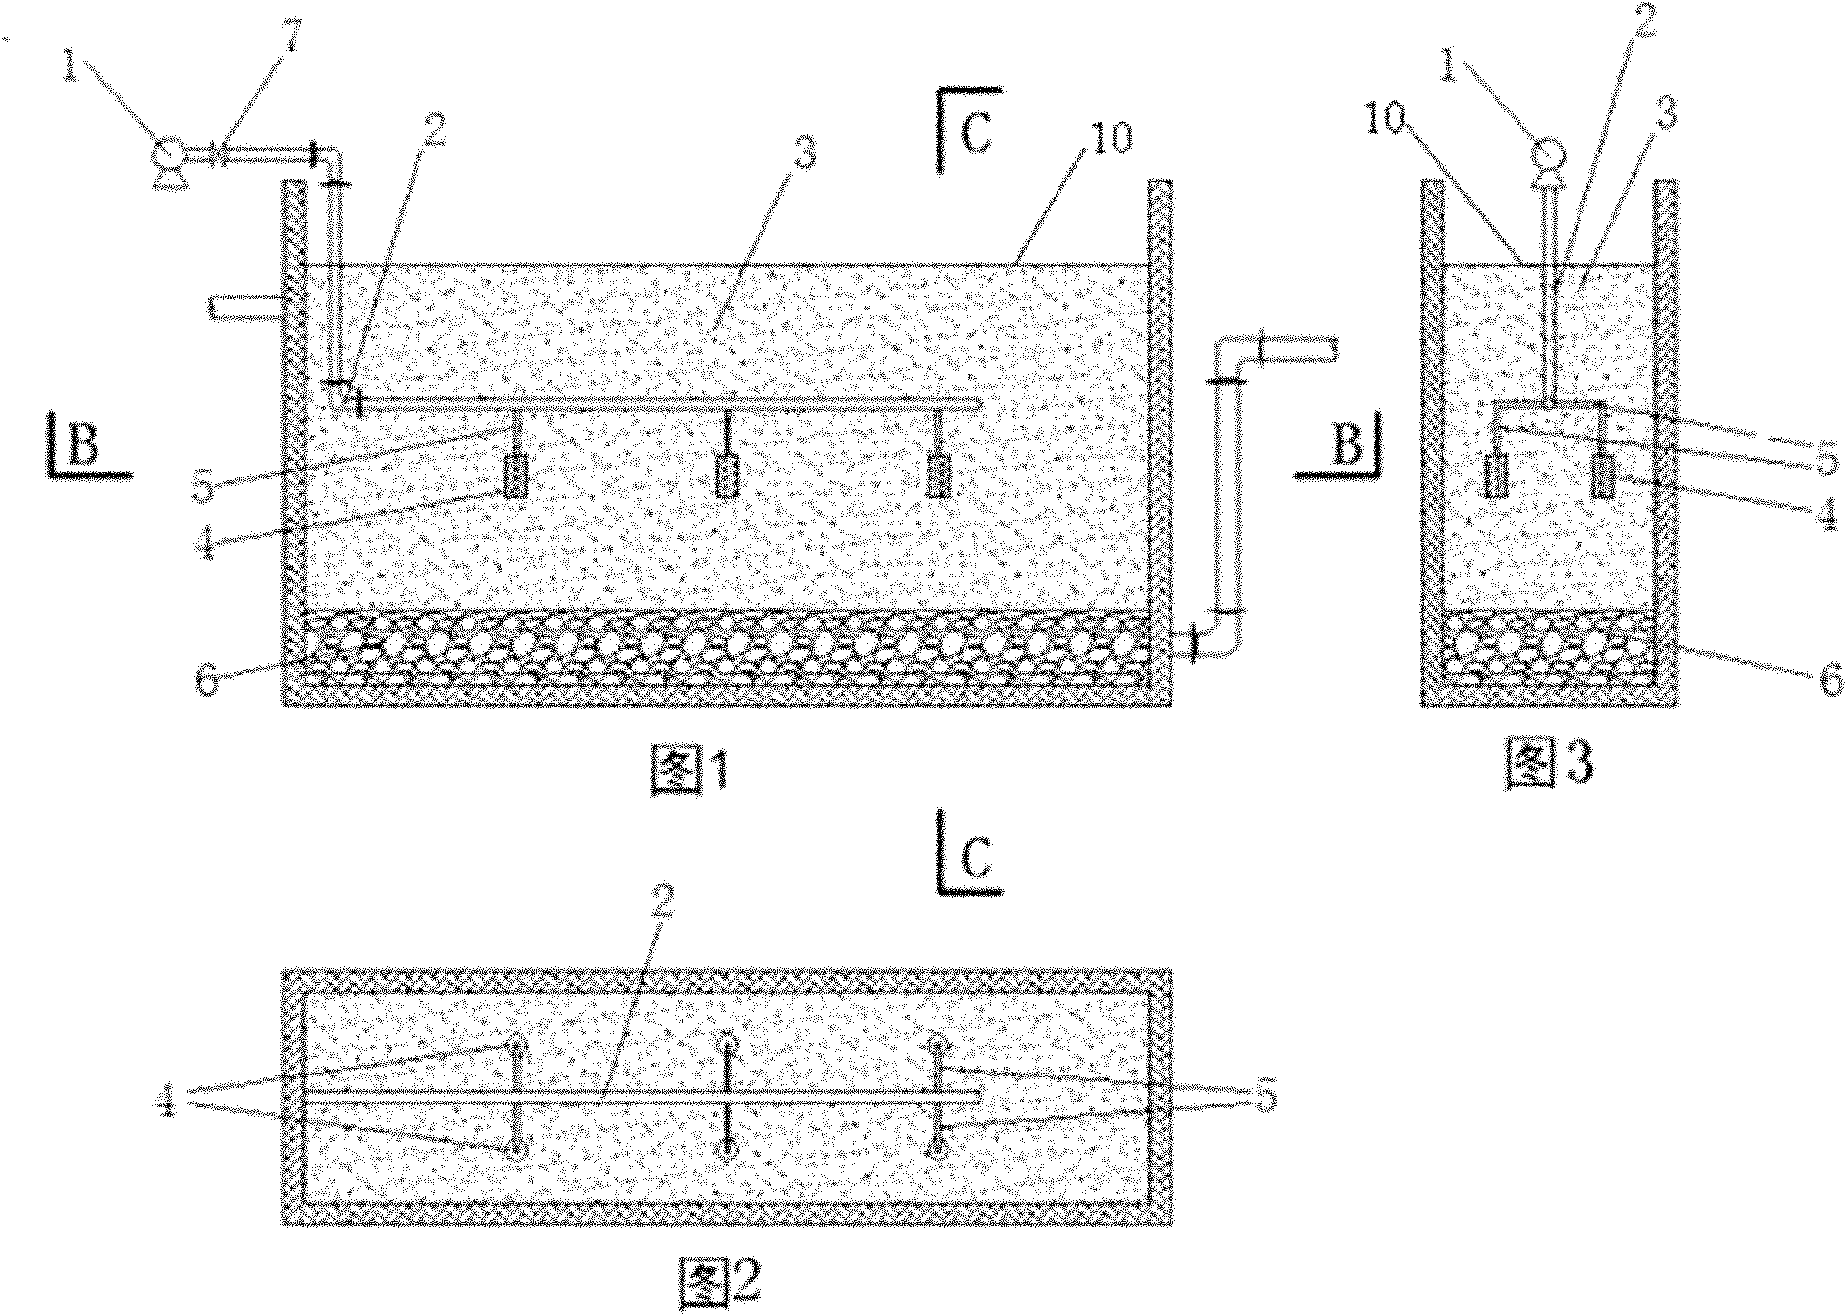 Anti-plugging method and device of constructed wetland